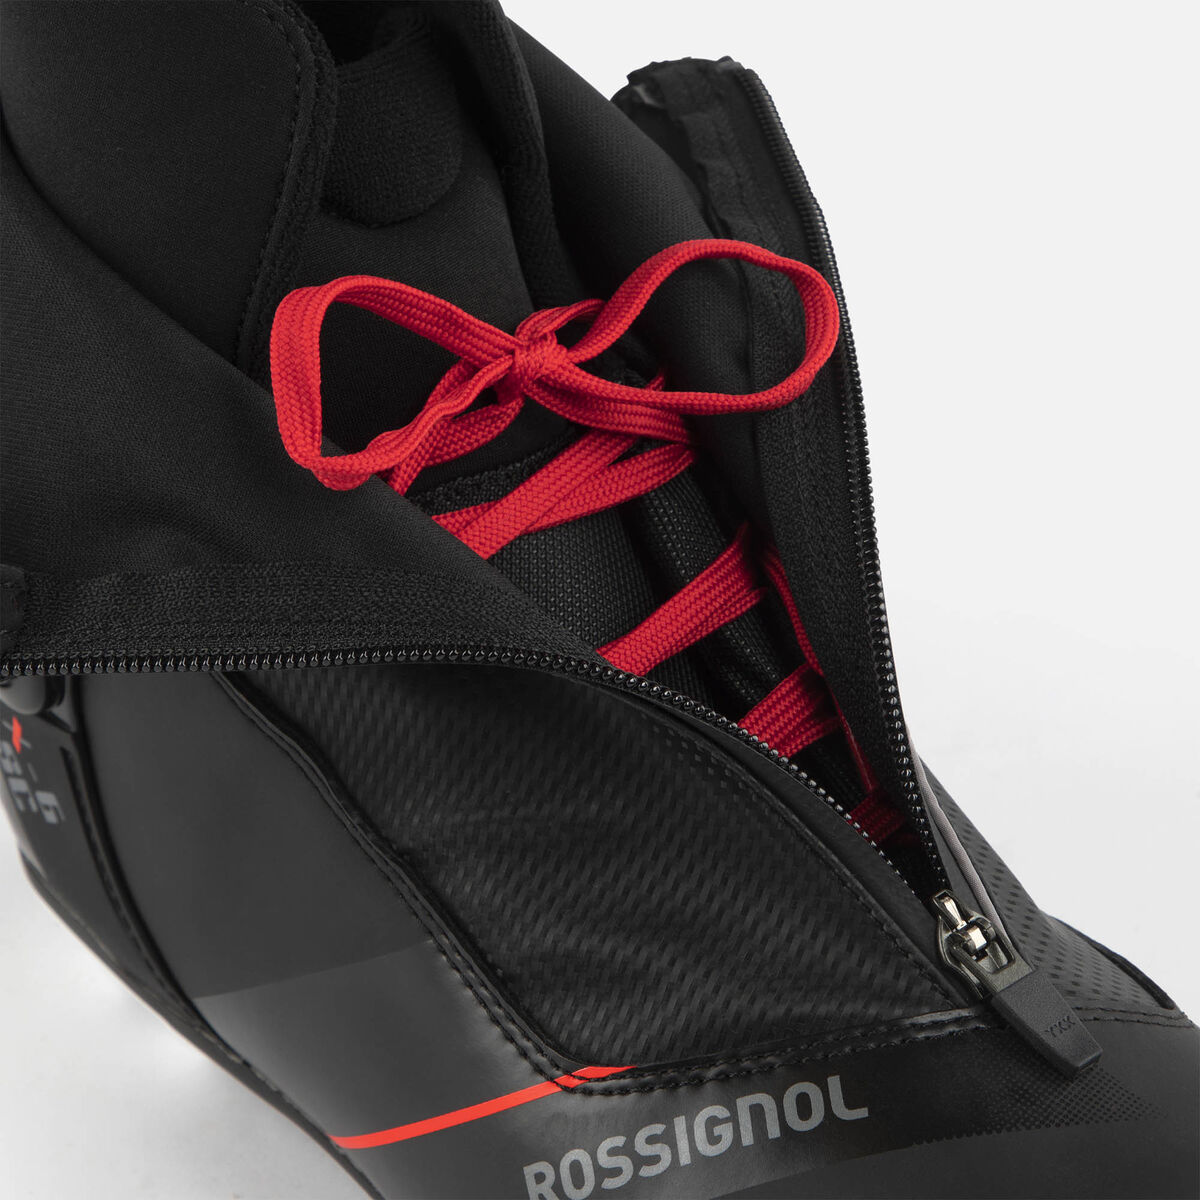 Unisex Race Skating And Classic Nordic Boots X-6 Sc